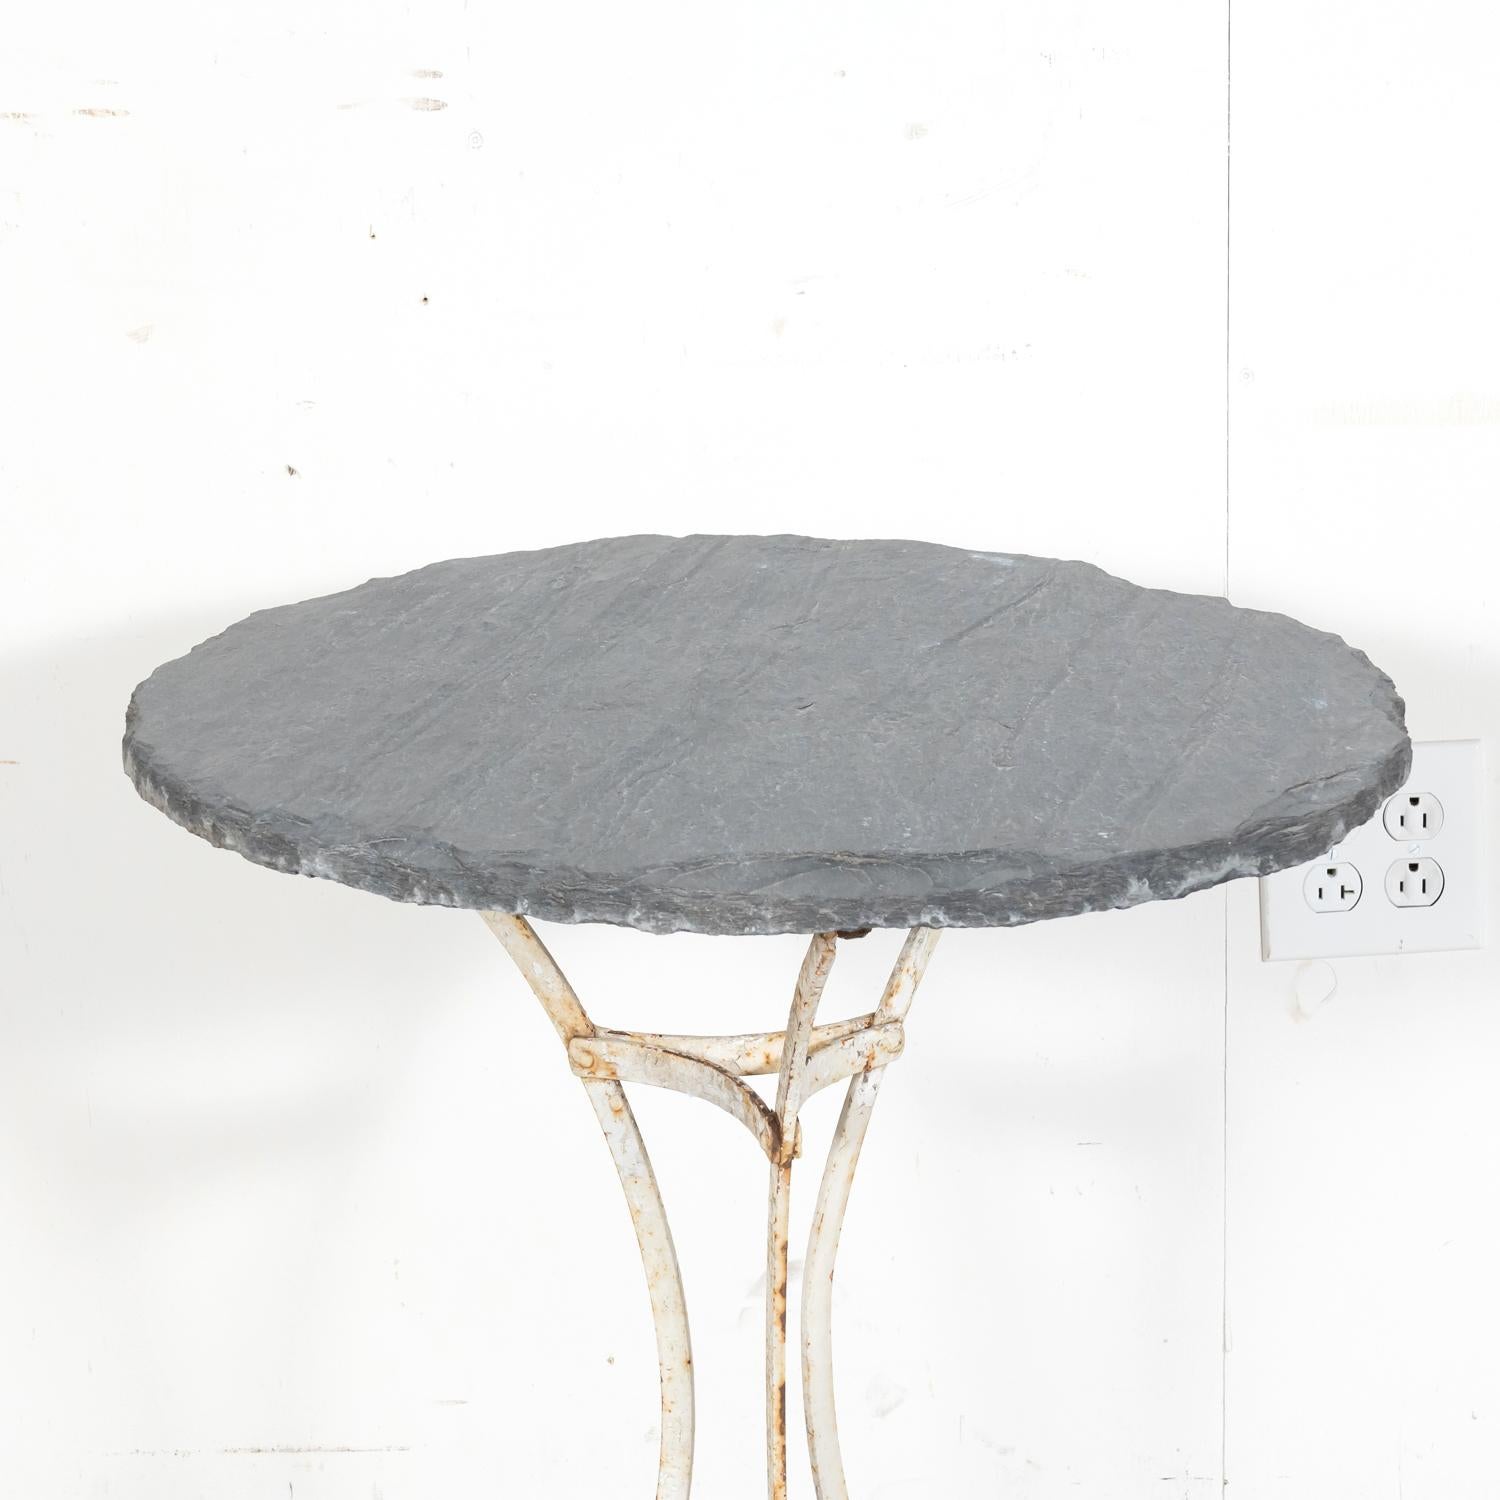 19th Century French Bistro or Garden Table with Round Slate Top and White Paint In Good Condition For Sale In Birmingham, AL